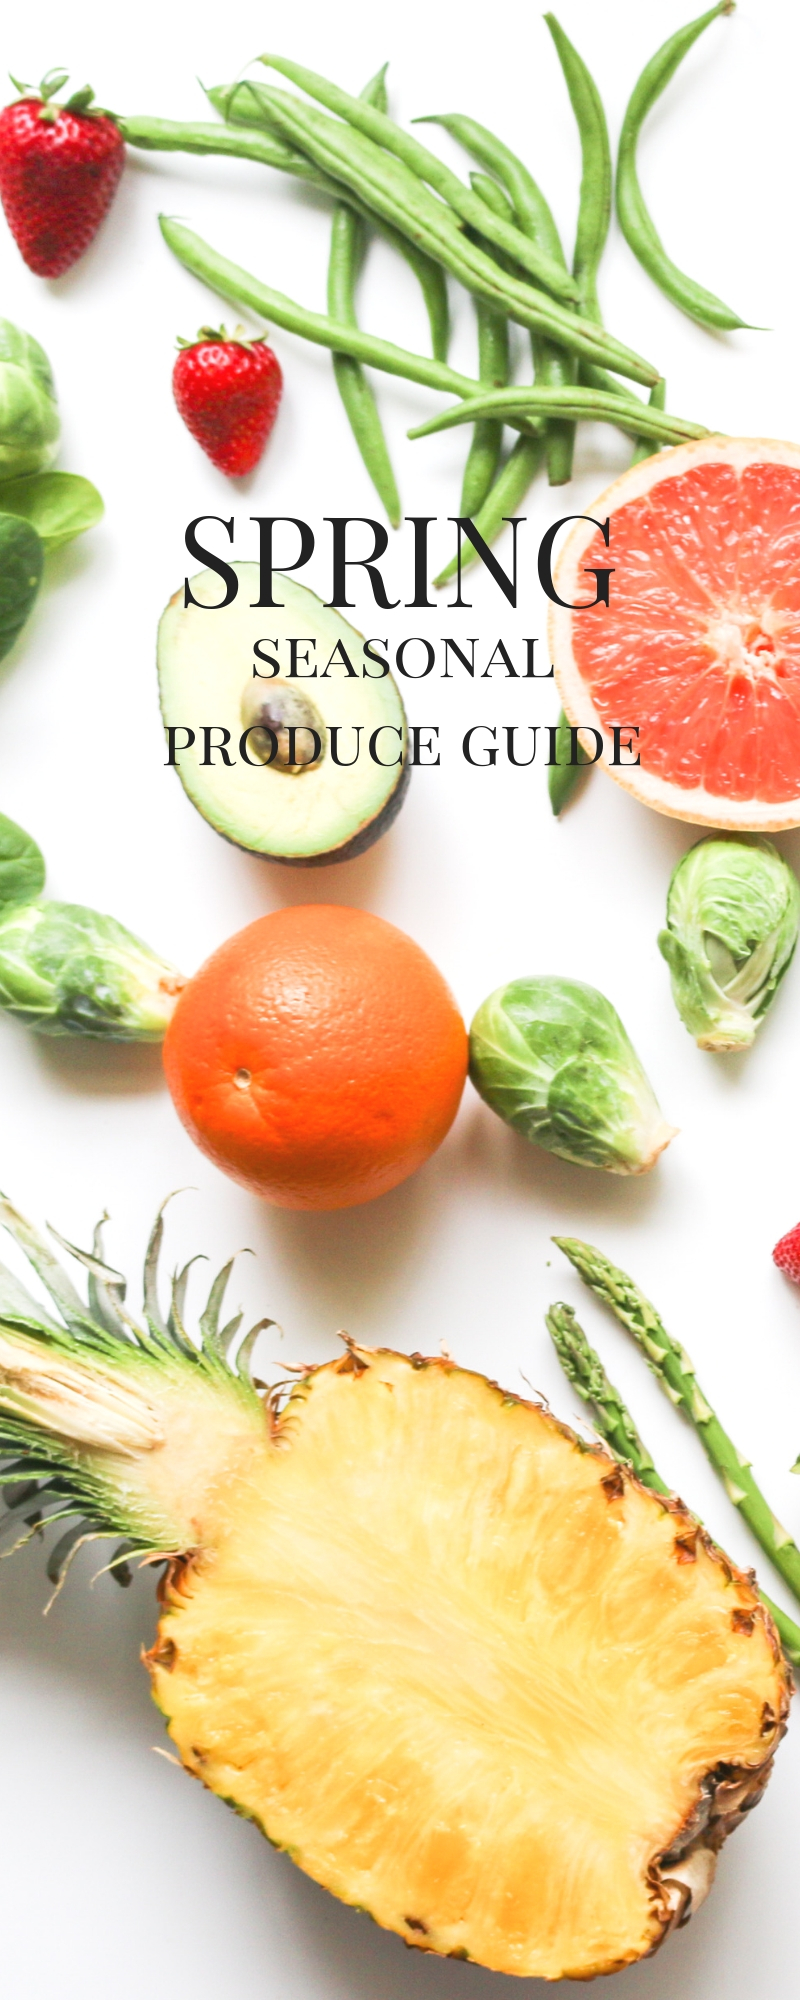 Spring Seasonal Produce Shopping Guide | www.livesimplynatural.com